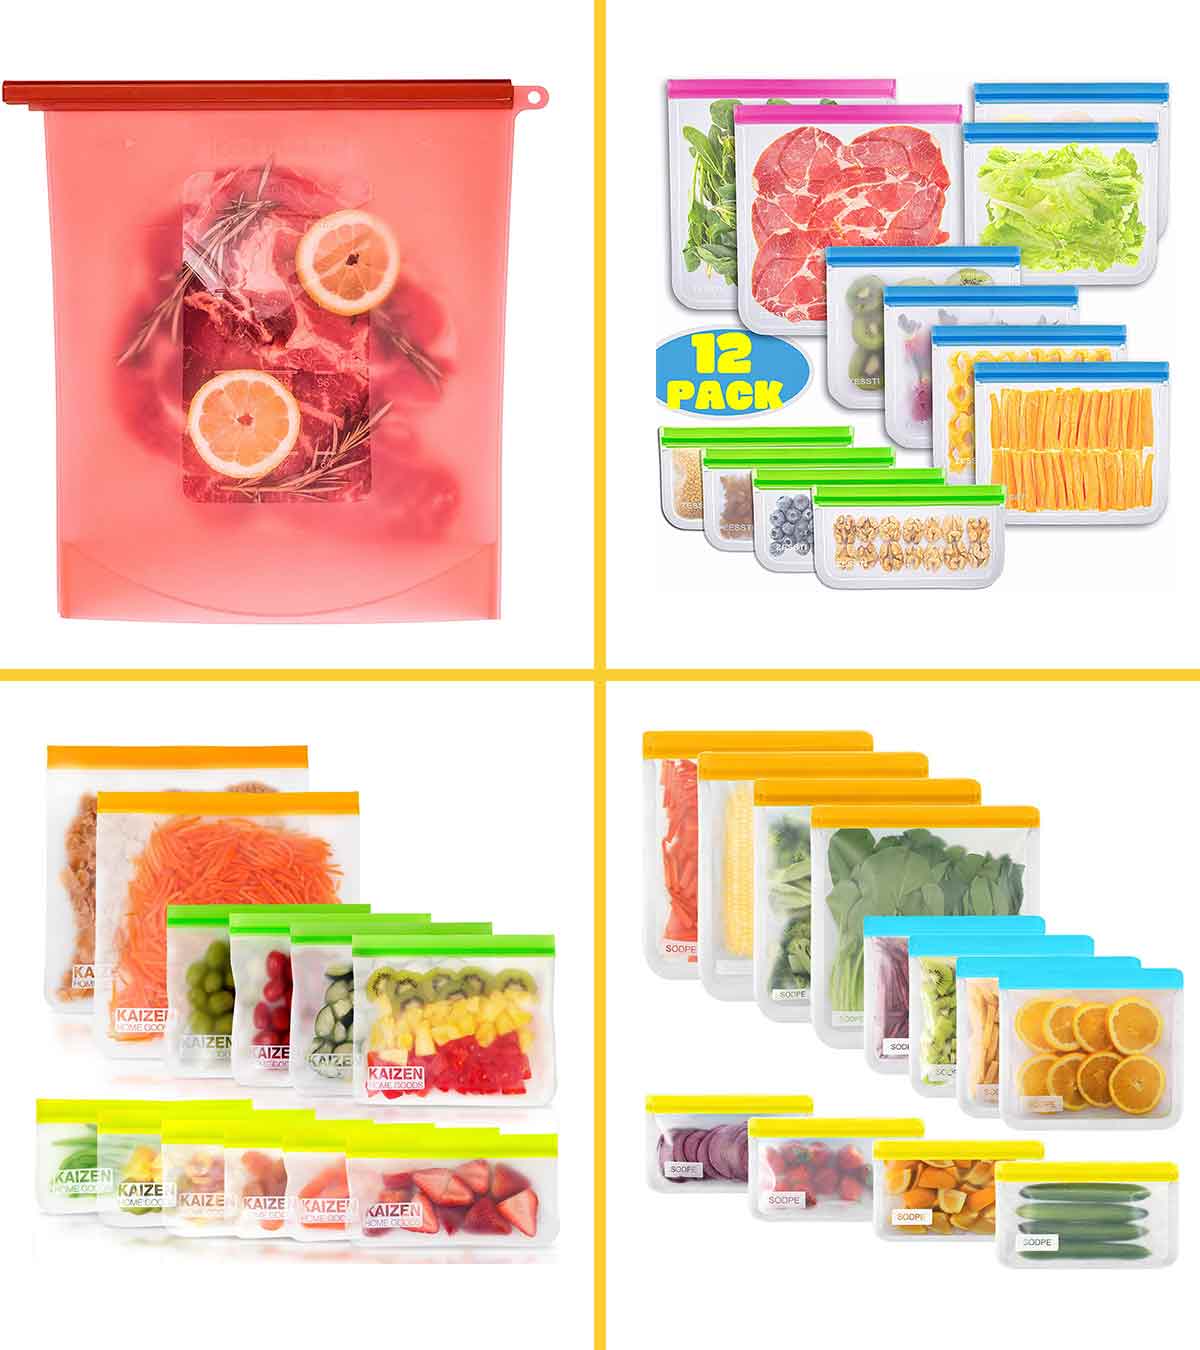 Homelux Theory Reusable Silicone Food Storage Bags Silicone Bags Reusable Bags Silicone Silicone Storage Bags Silicone Food Bags Reusable Silicone